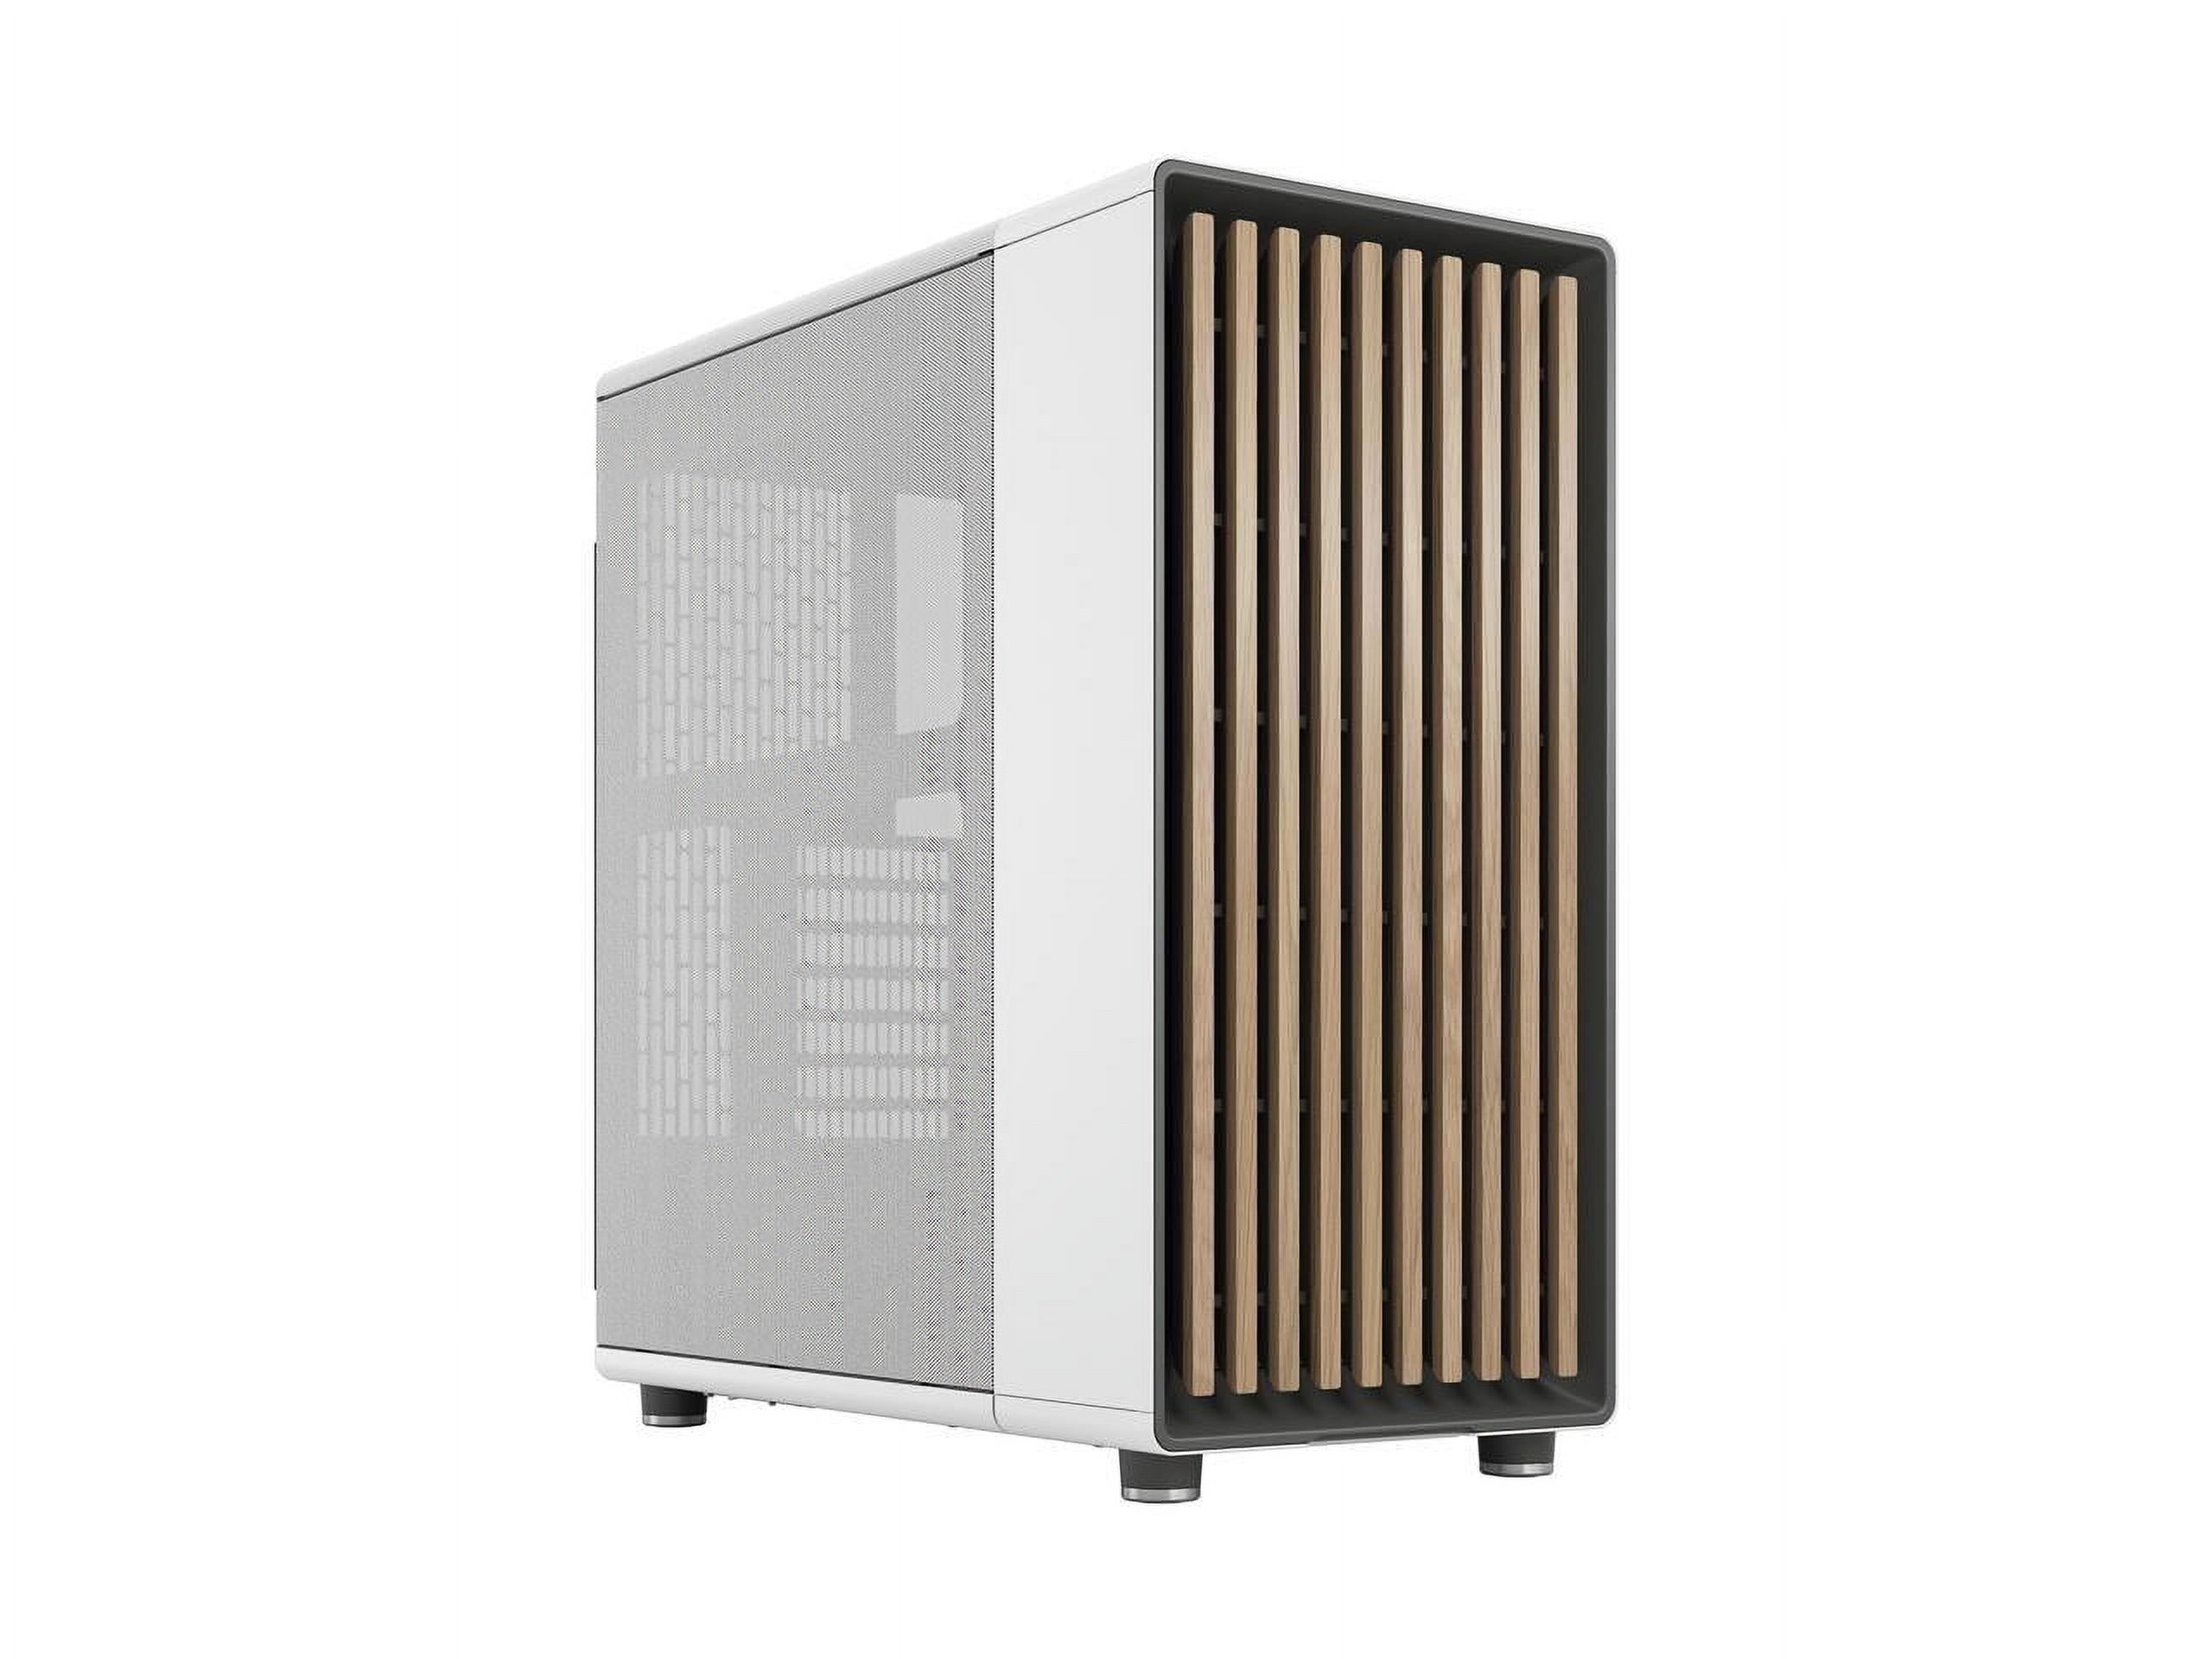 Fractal Design North Chalk White - Wood Oak Front - Mesh Side Panels - Two  140mm Aspect PWM Fans Included - Type C USB - ATX Airflow Mid Tower PC  Gaming Case